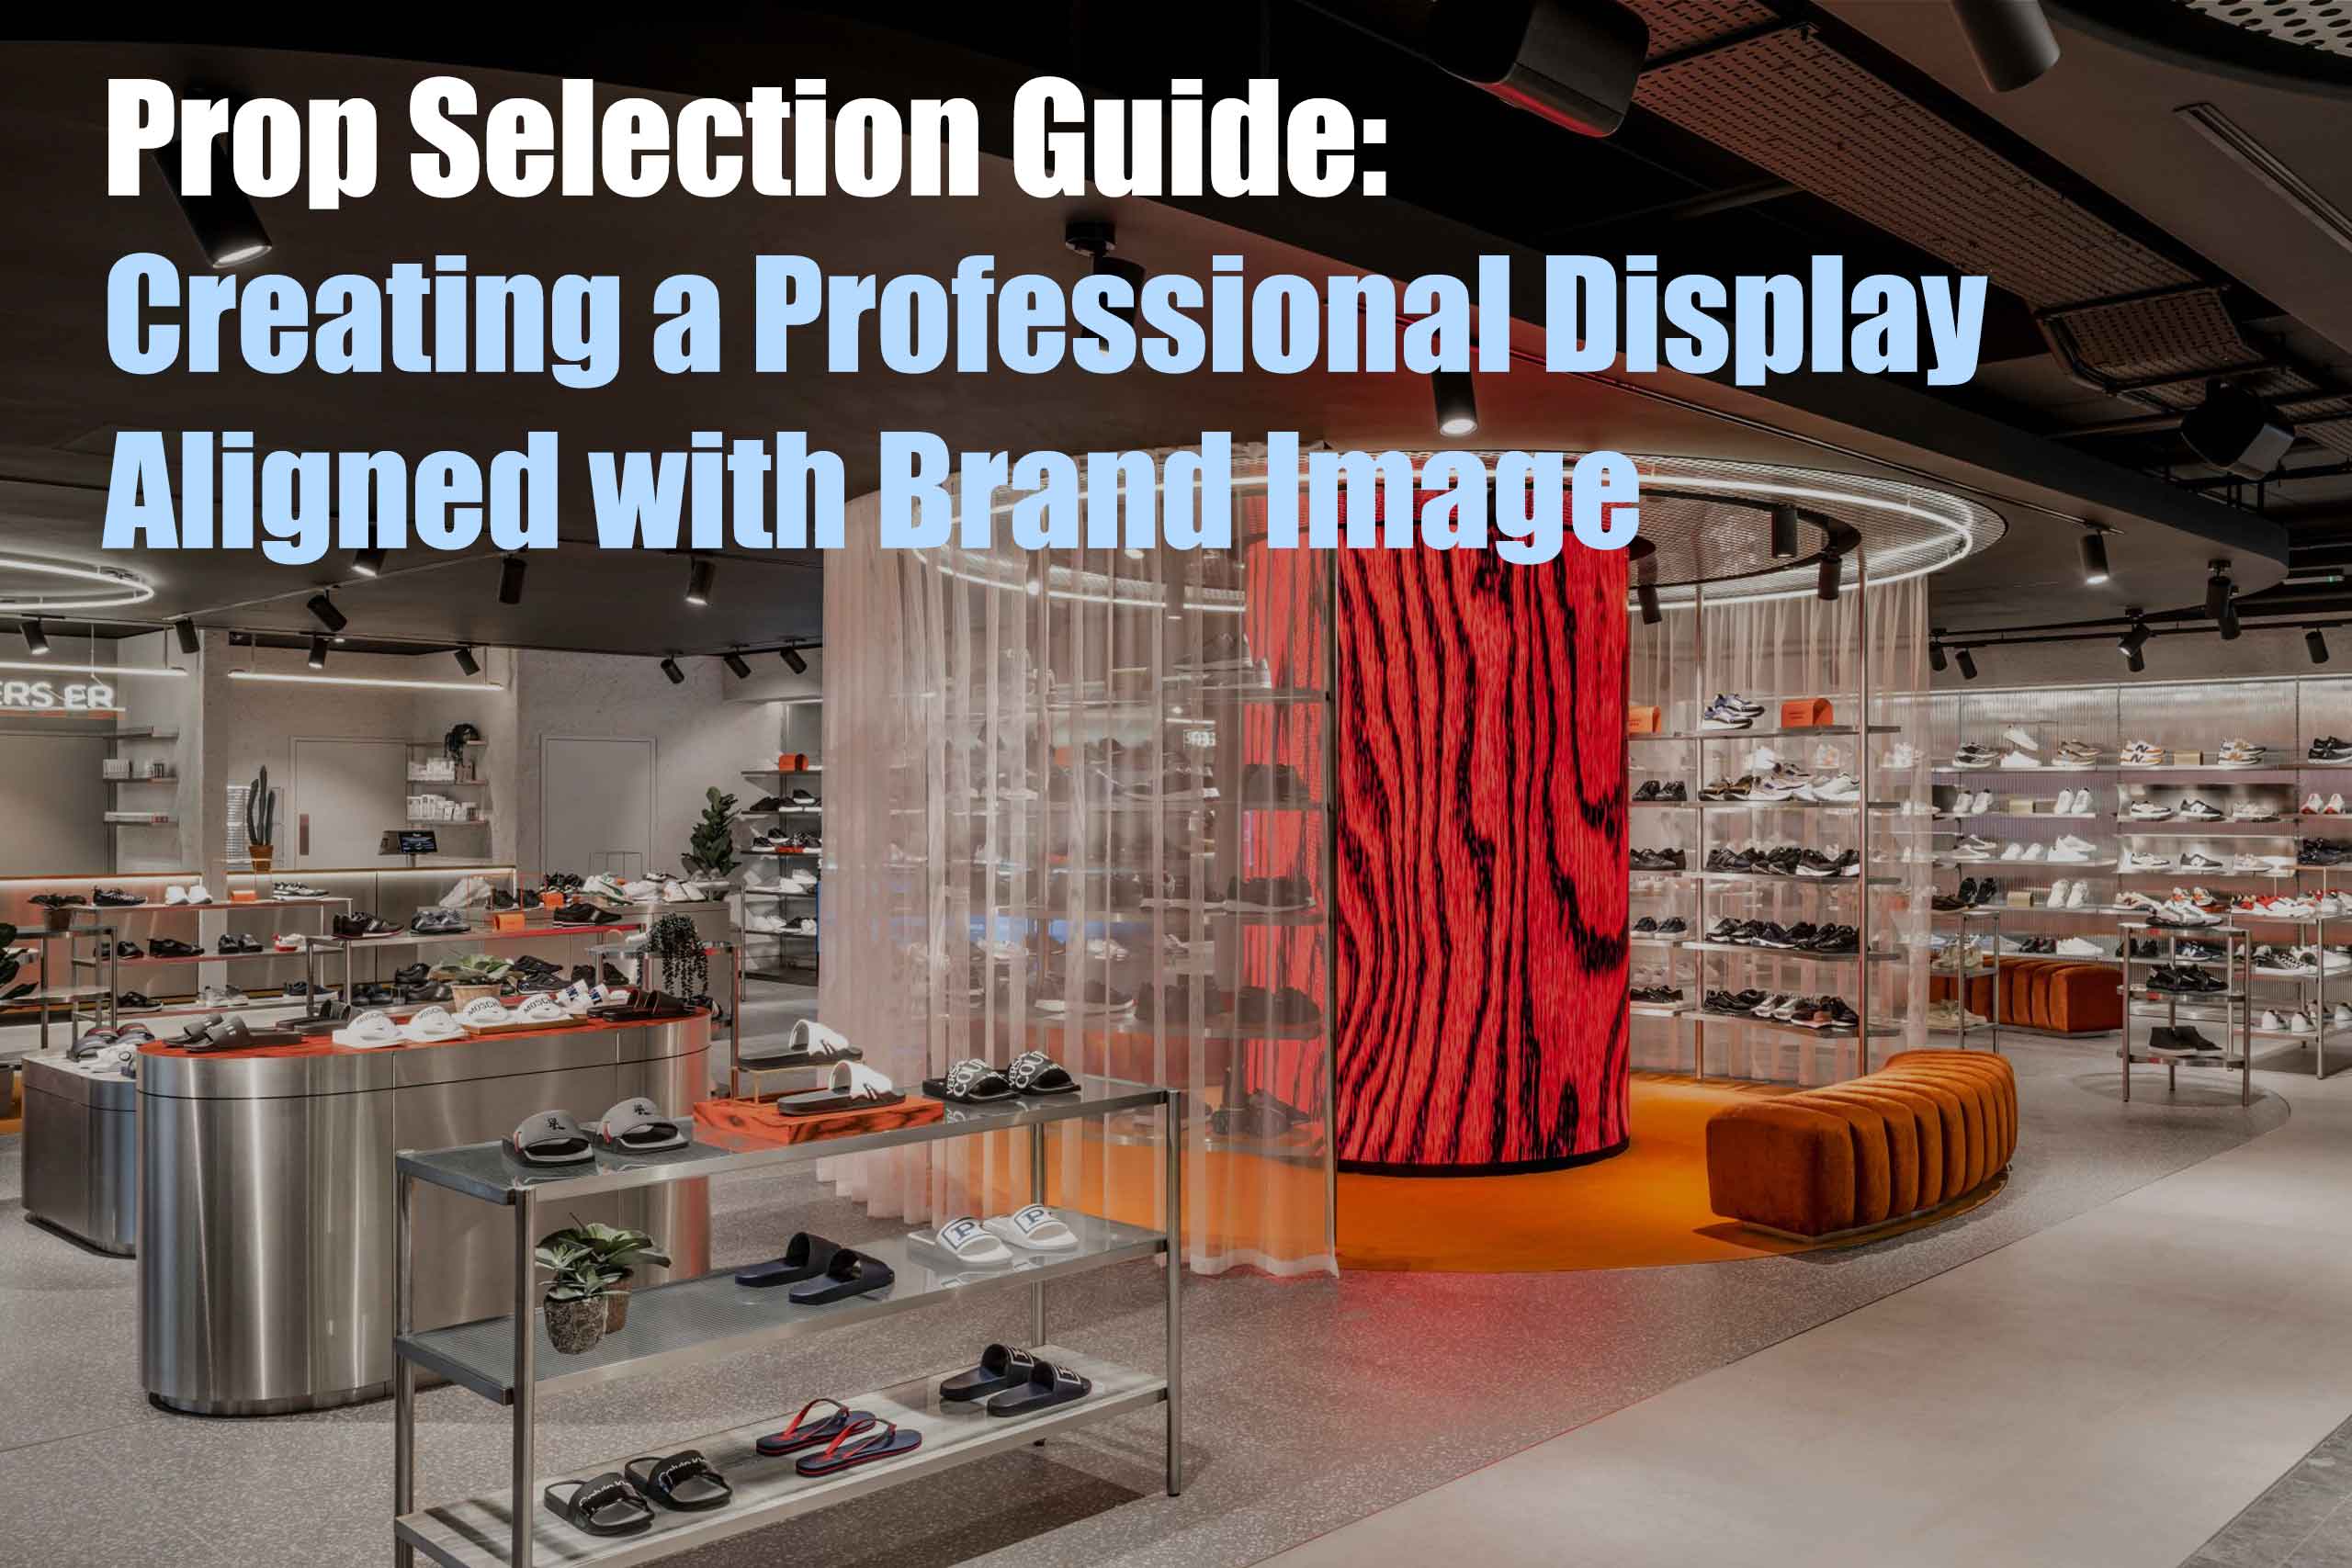 Prop Selection Guide: Creating a Professional Display Aligned with Brand Image